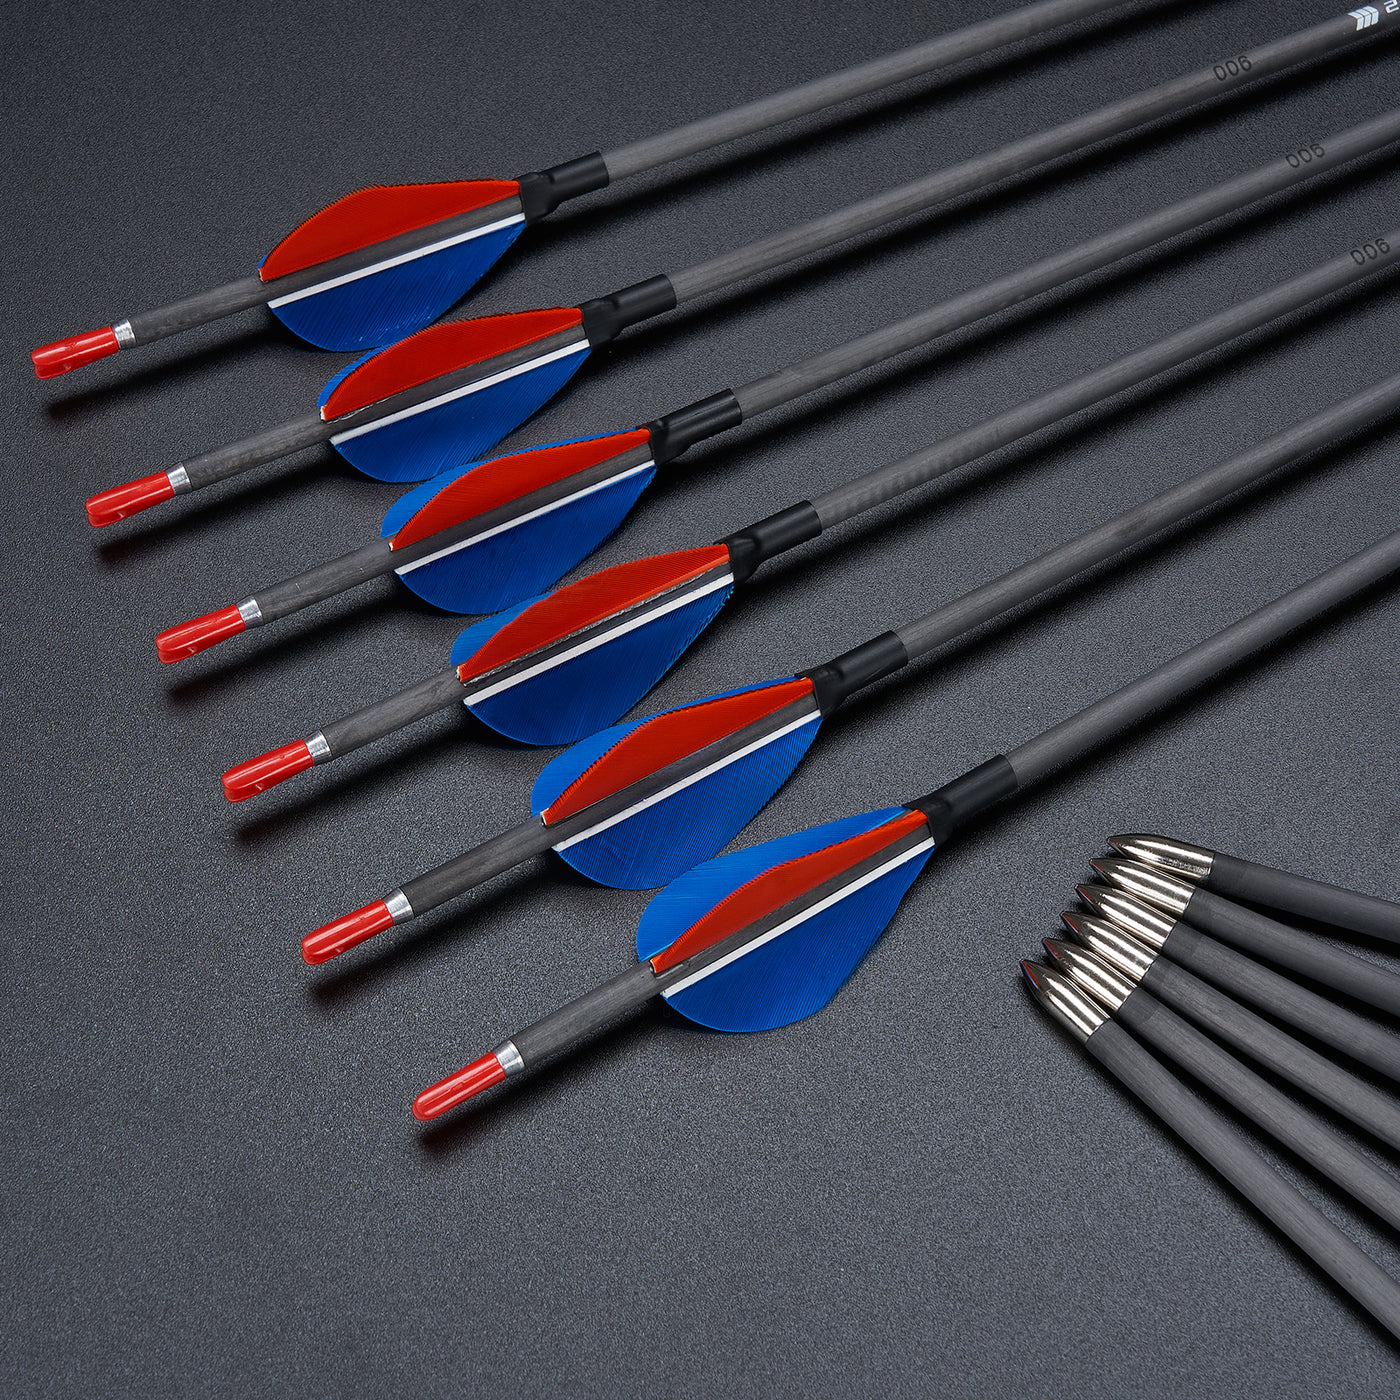 12x 32" ID 4.2mm Slim Turkey Feather Pure Carbon Archery Fletched Arrows Spine 500/700/900 Blue/Orange For Target Practice